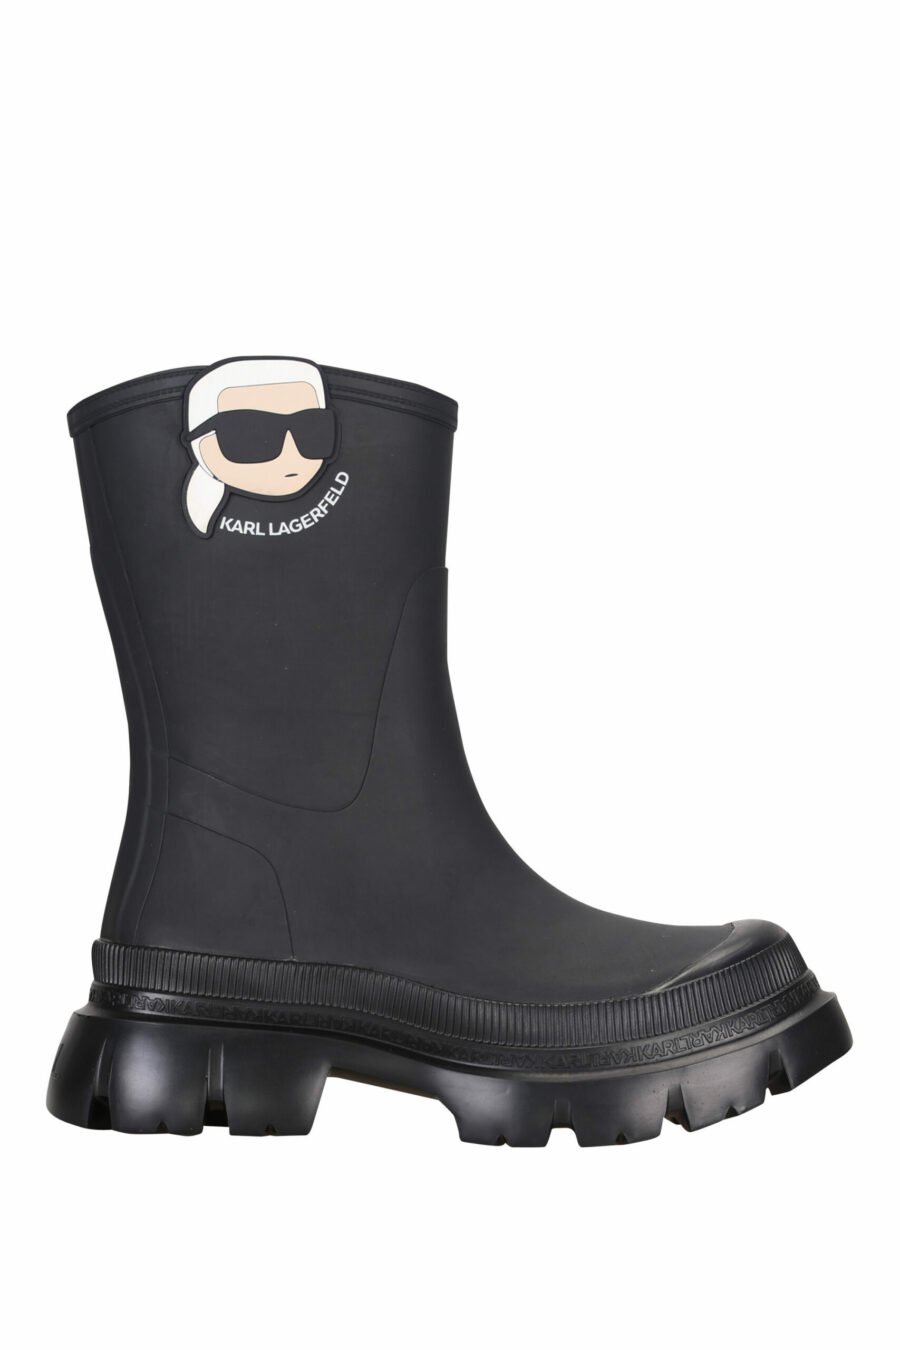 Black rubber boots with maxilogo "karl" - 5059529322037 scaled